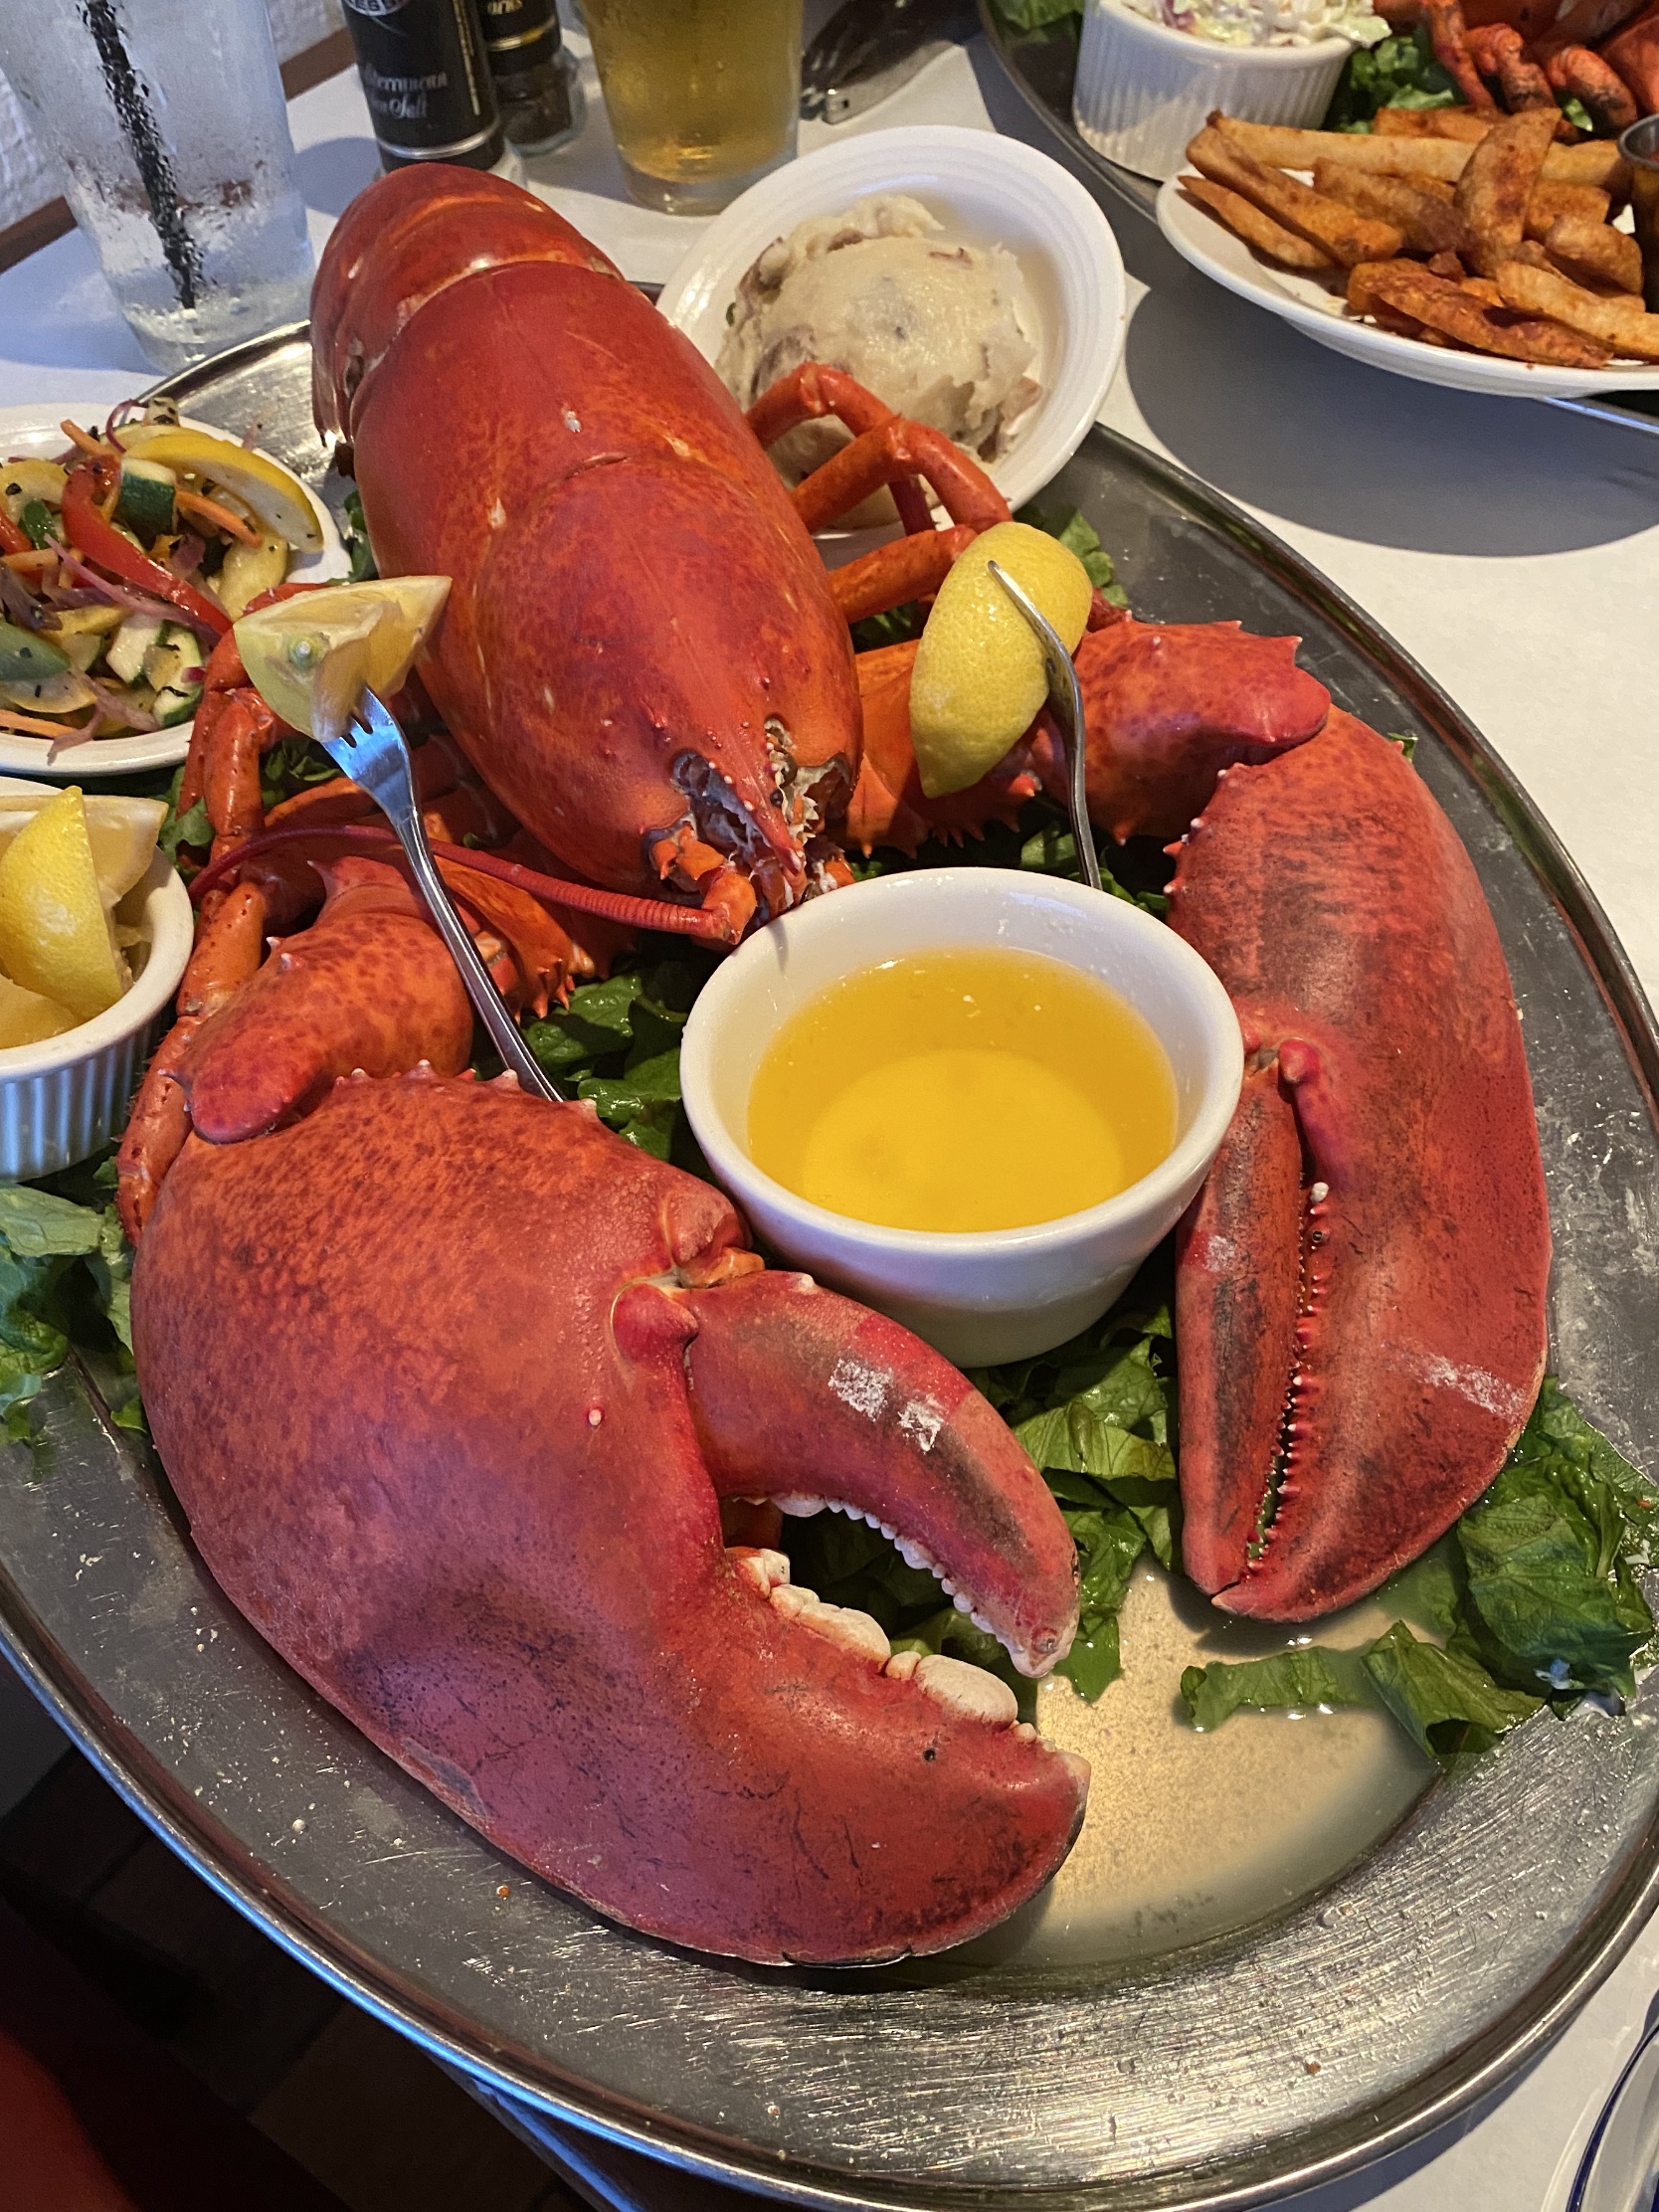 About that Lobster Dinner / myLot